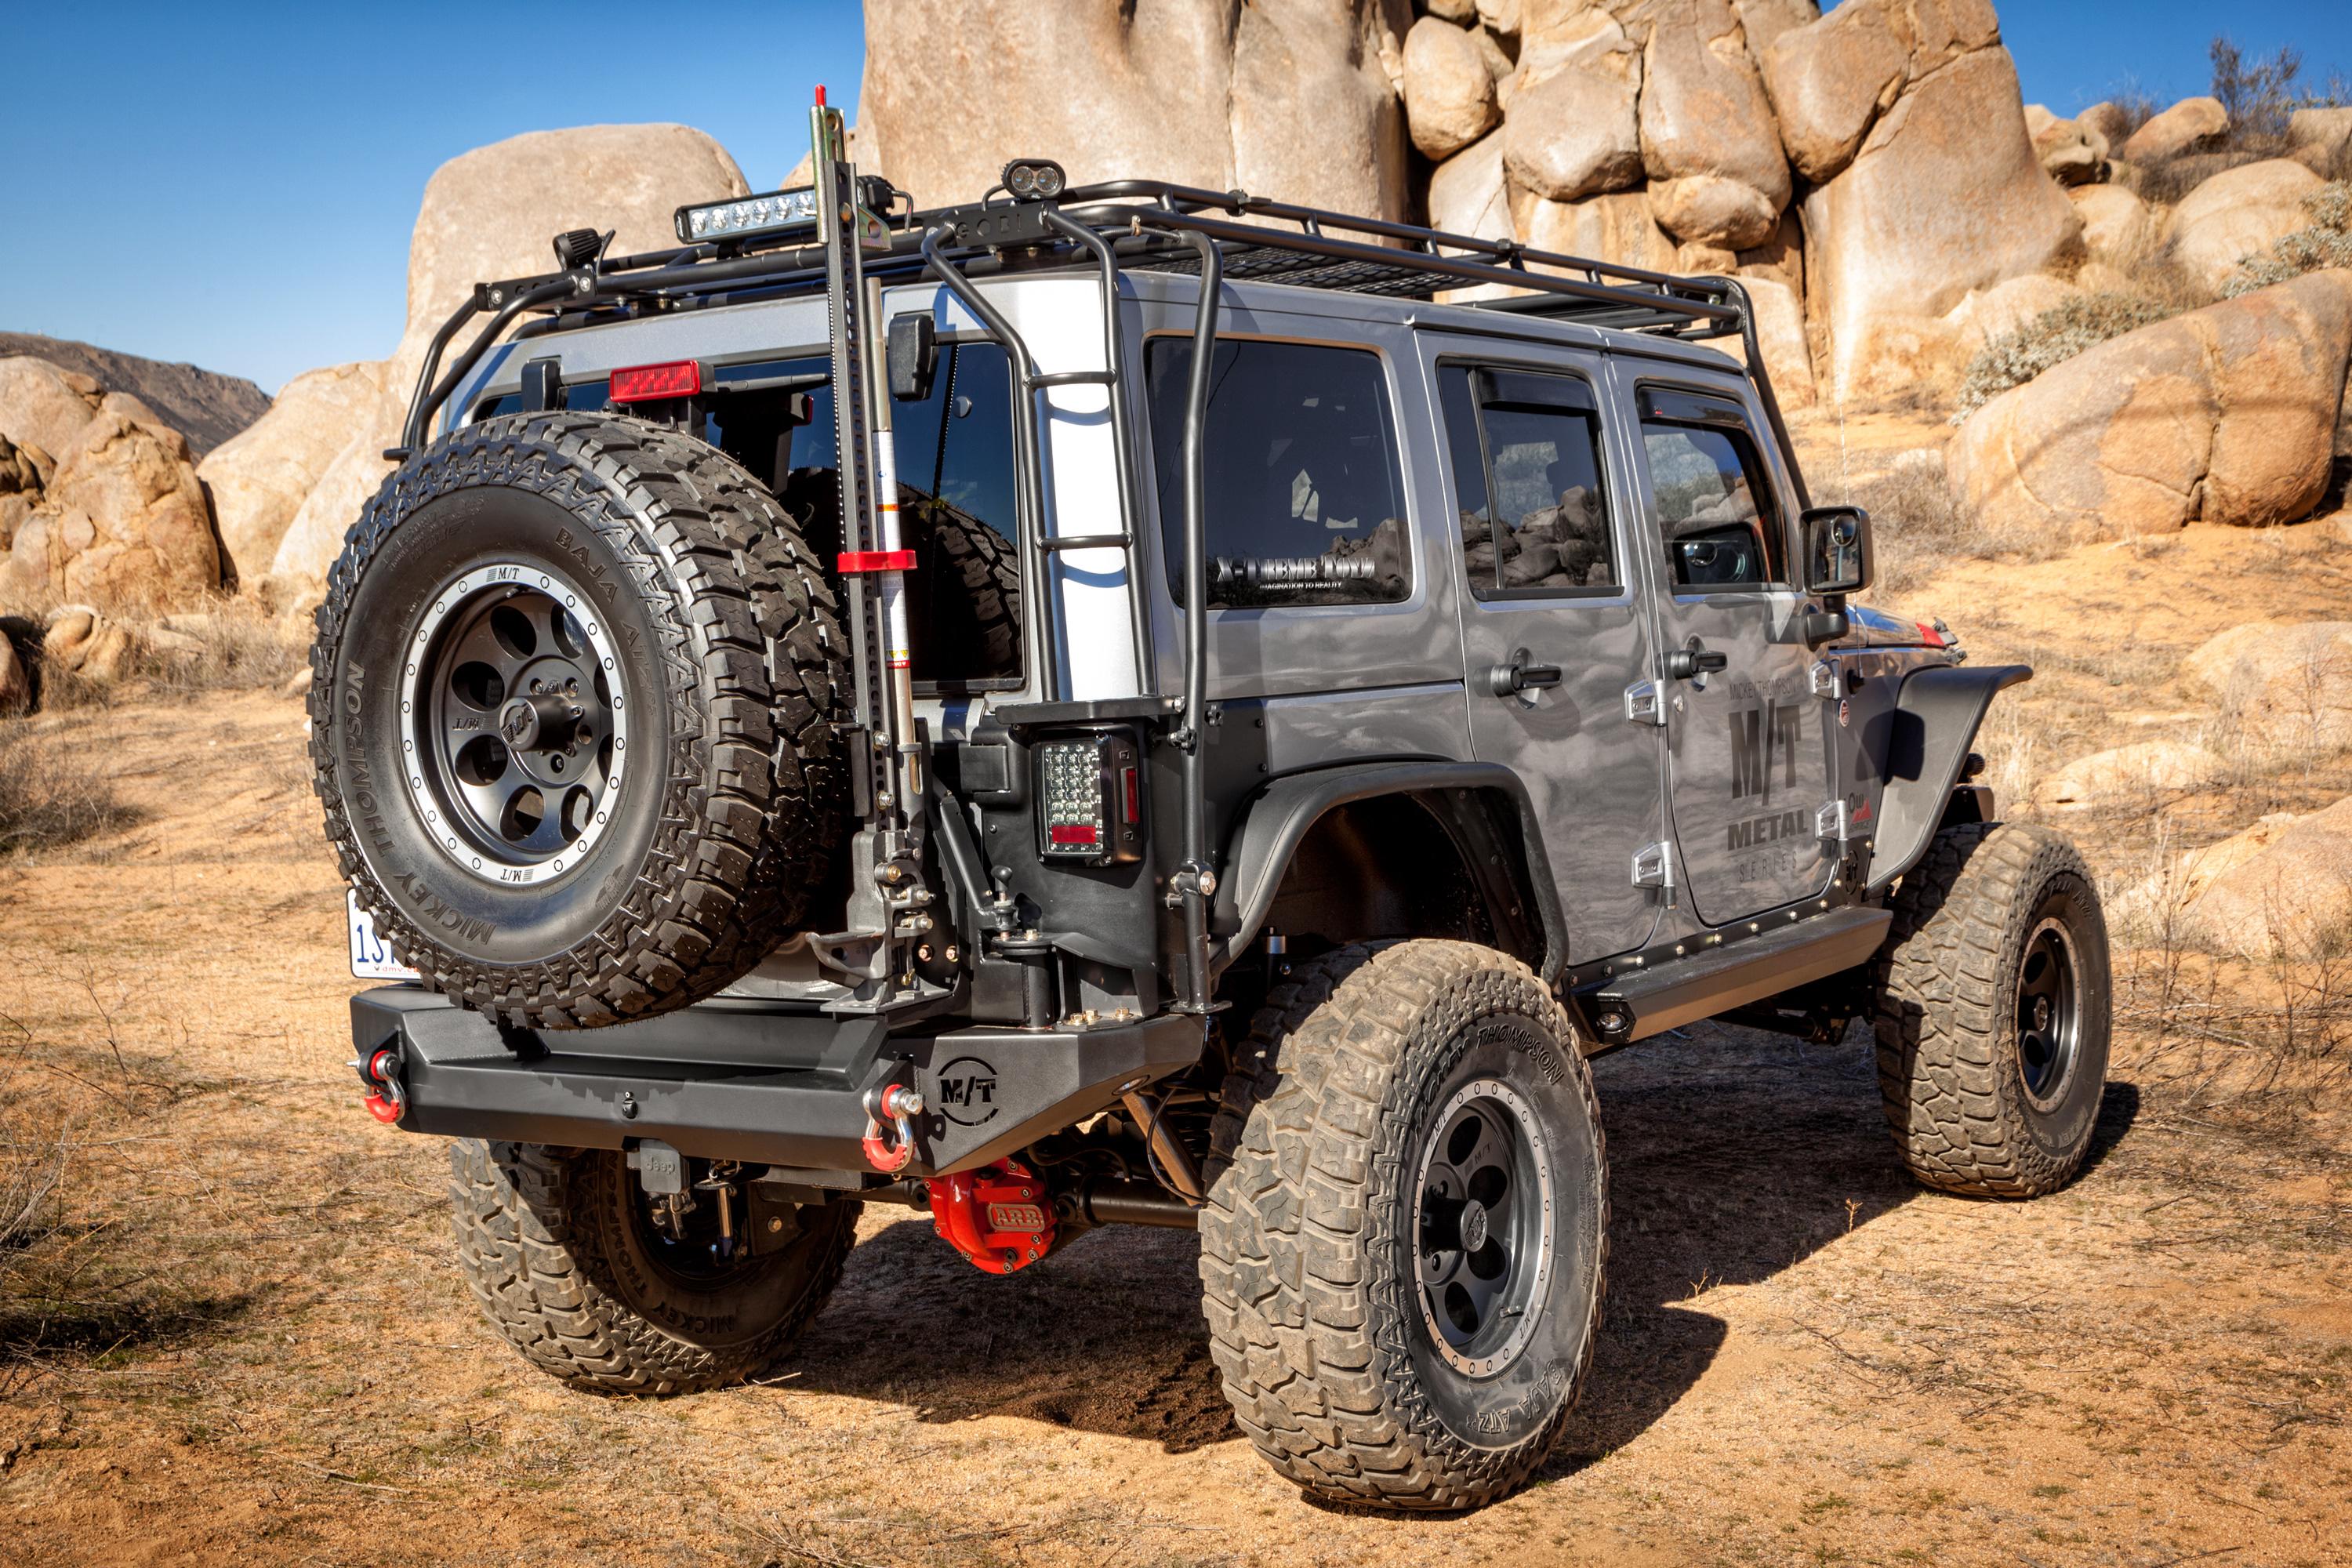 NEW M/T METAL SERIES REAR JEEP JK BUMPERS NOW AVAILABLE